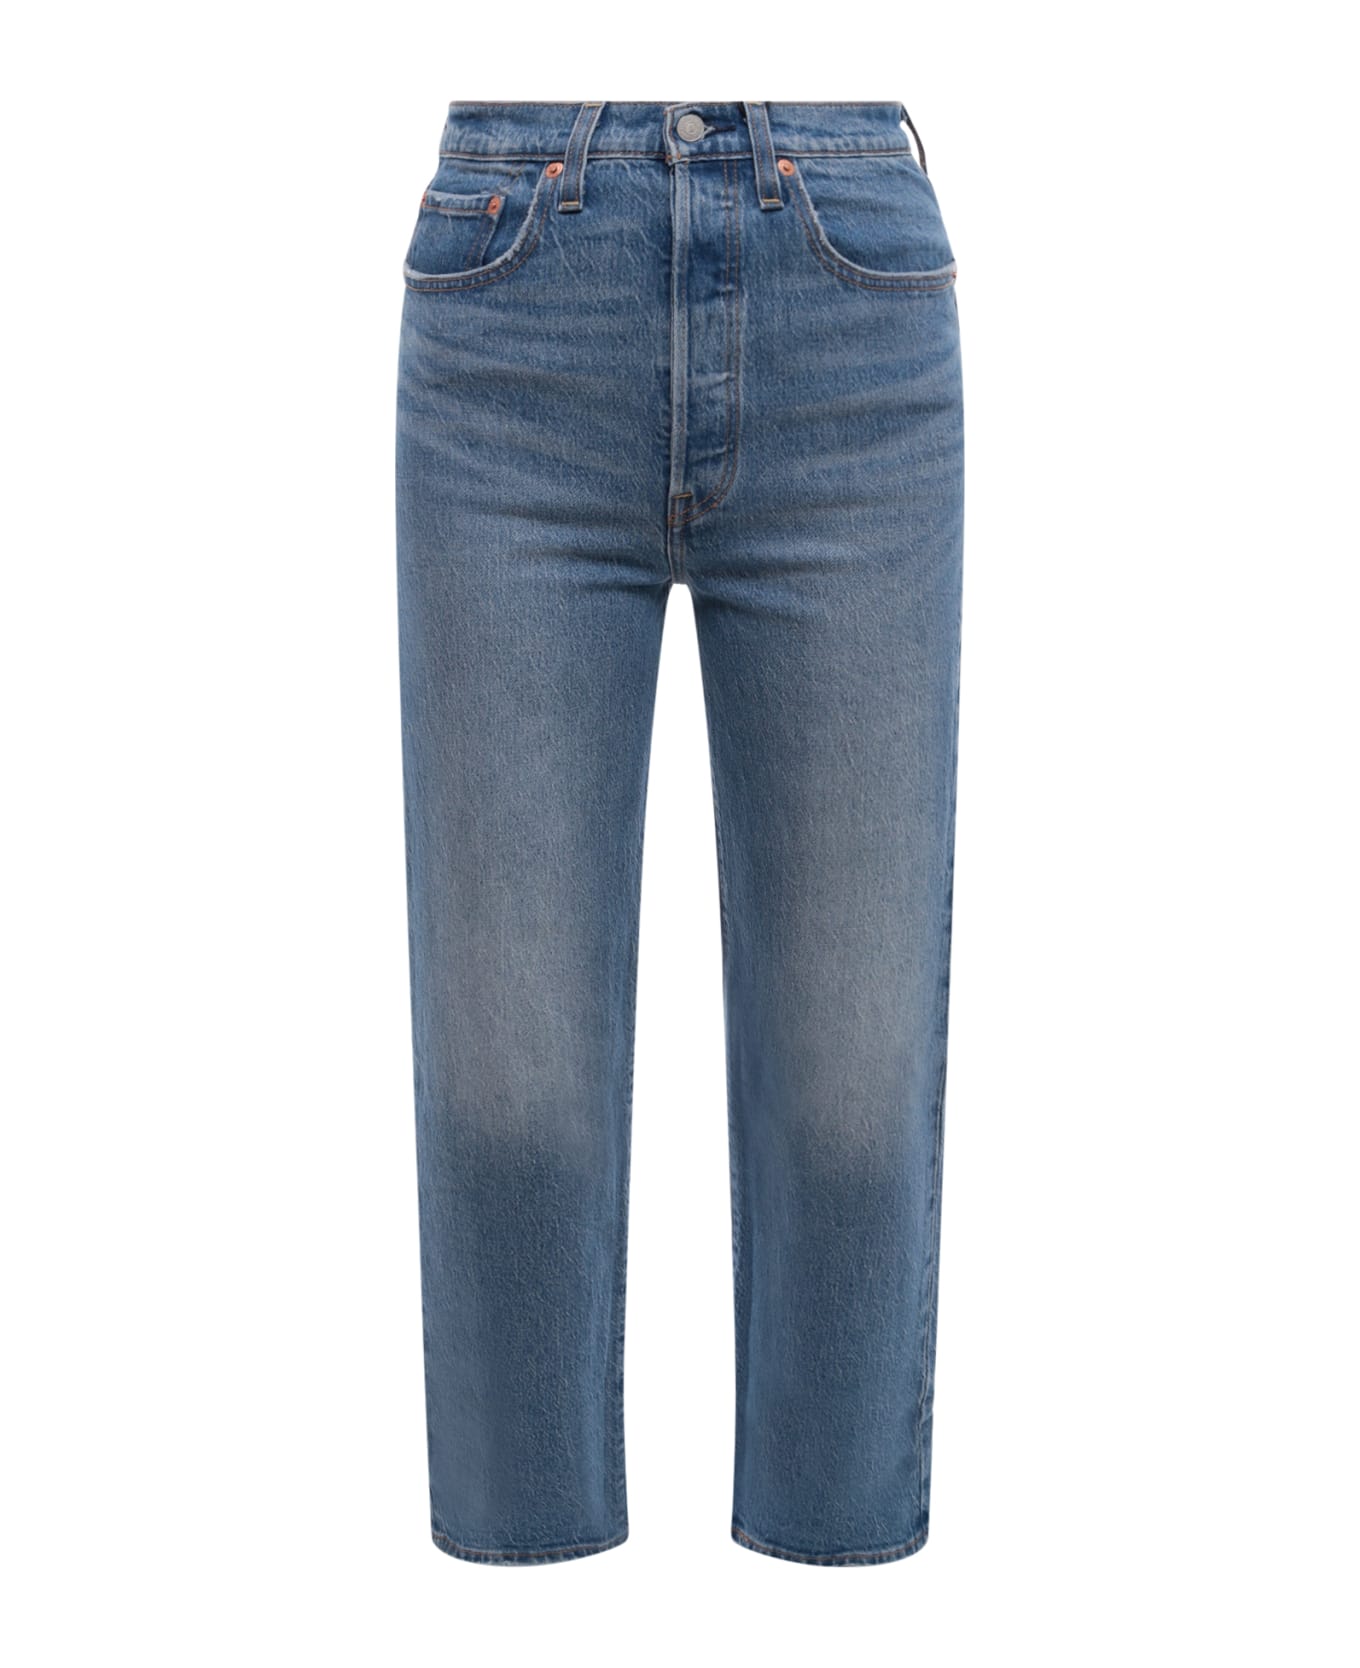 Levi's Ribcage Straight Ankle Jeans - Blue デニム